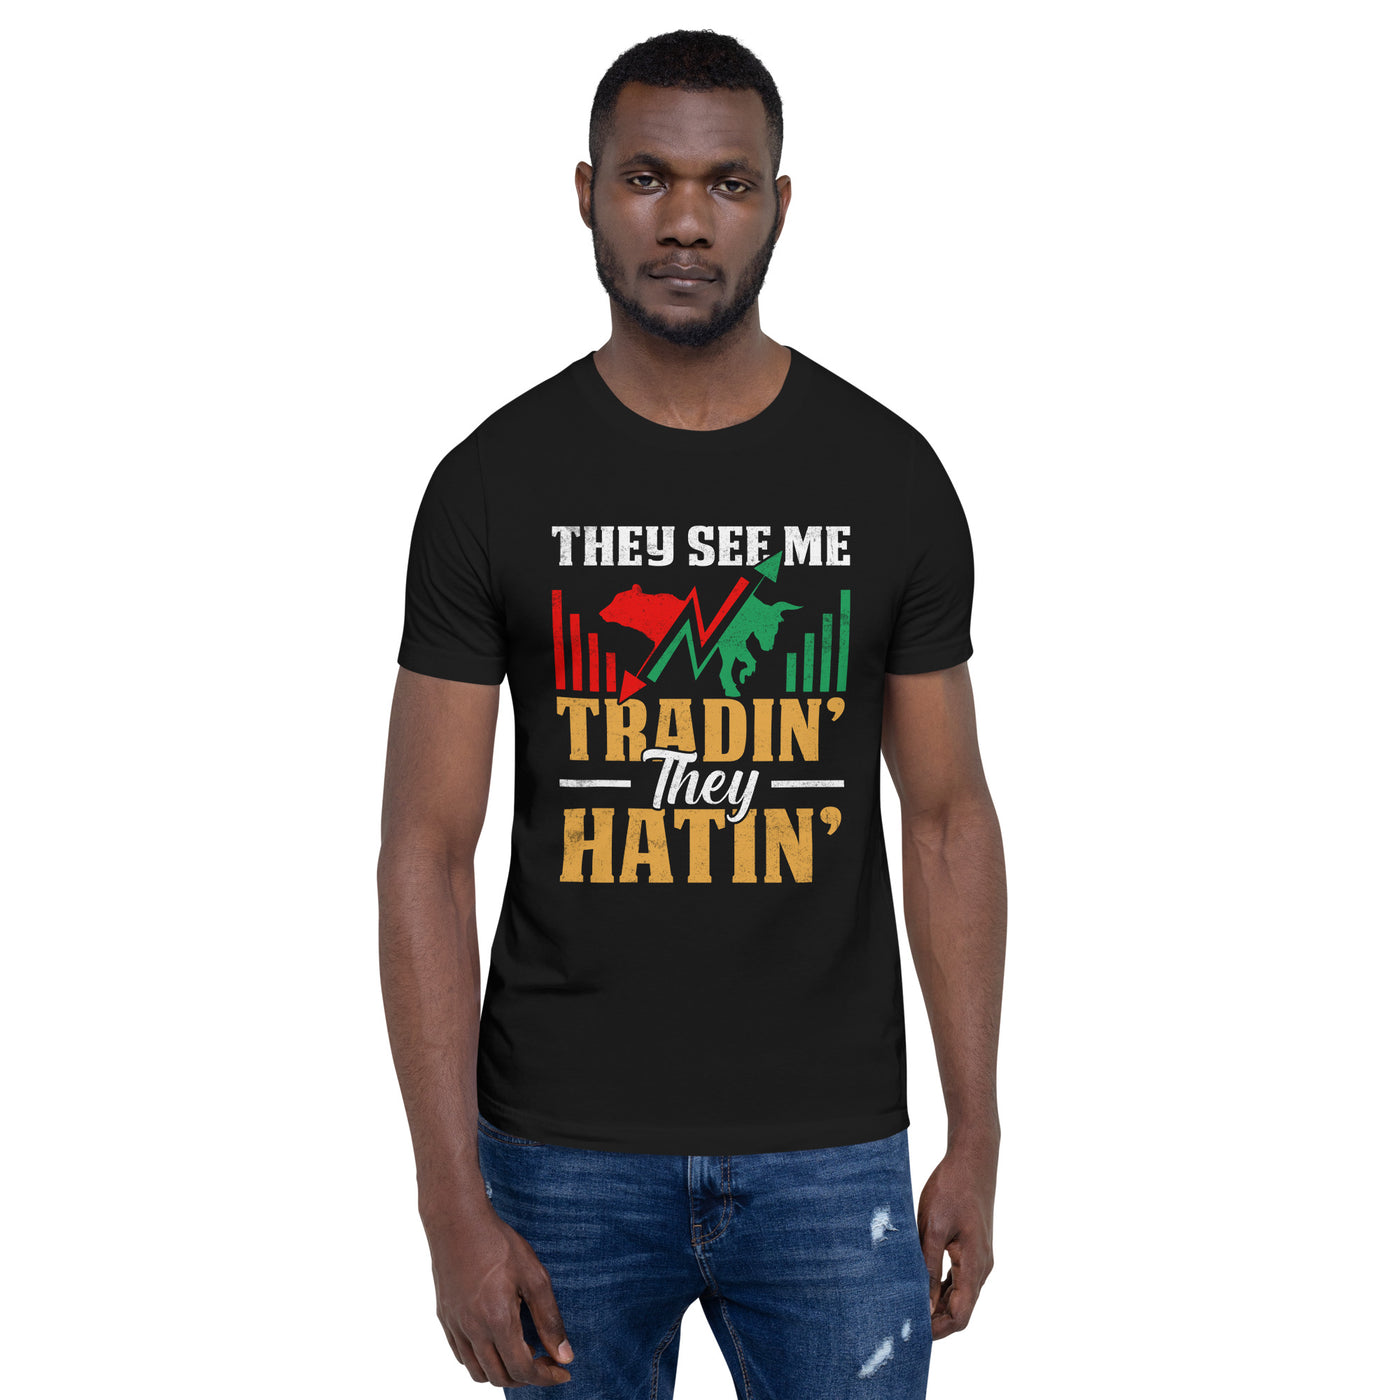 They See me Trading, they Hating -  Unisex t-shirt